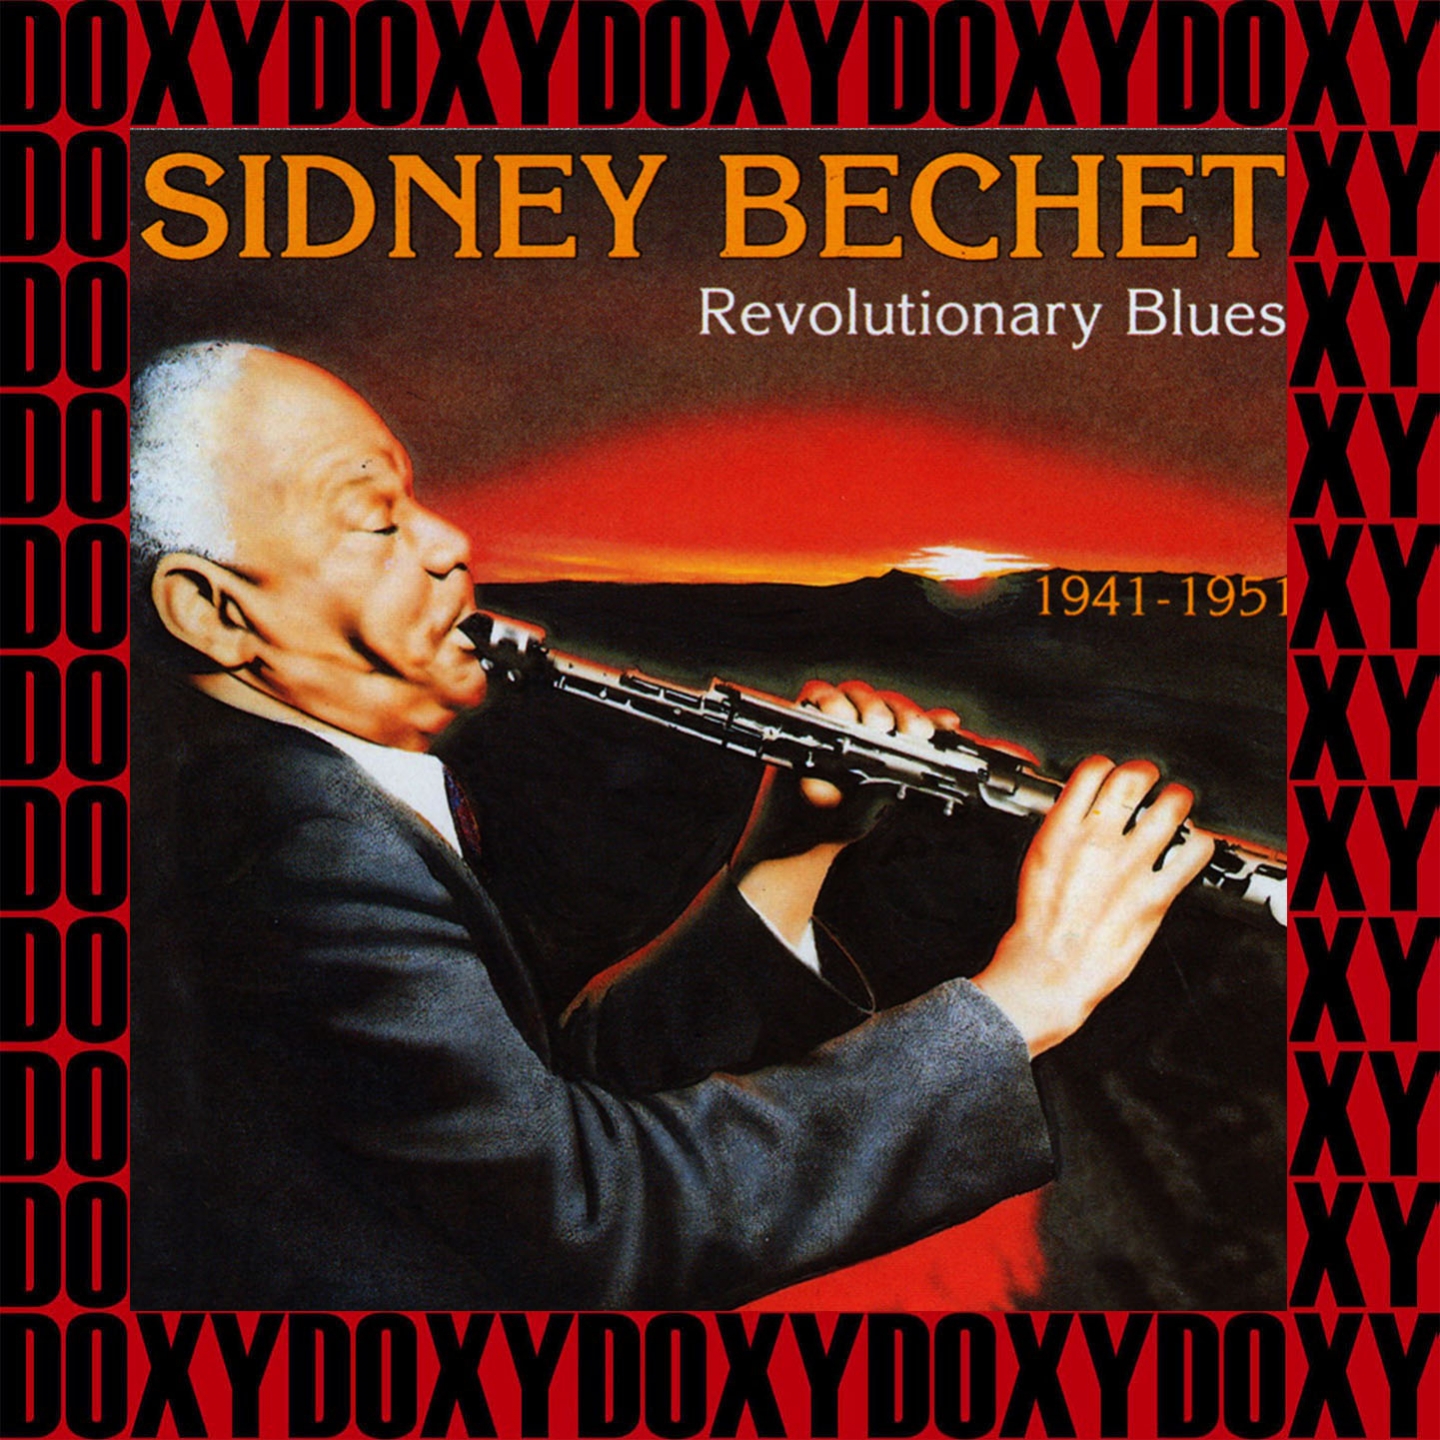 Revolutionary Blues - 1941-1951 (Remastered Version) (Doxy Collection)